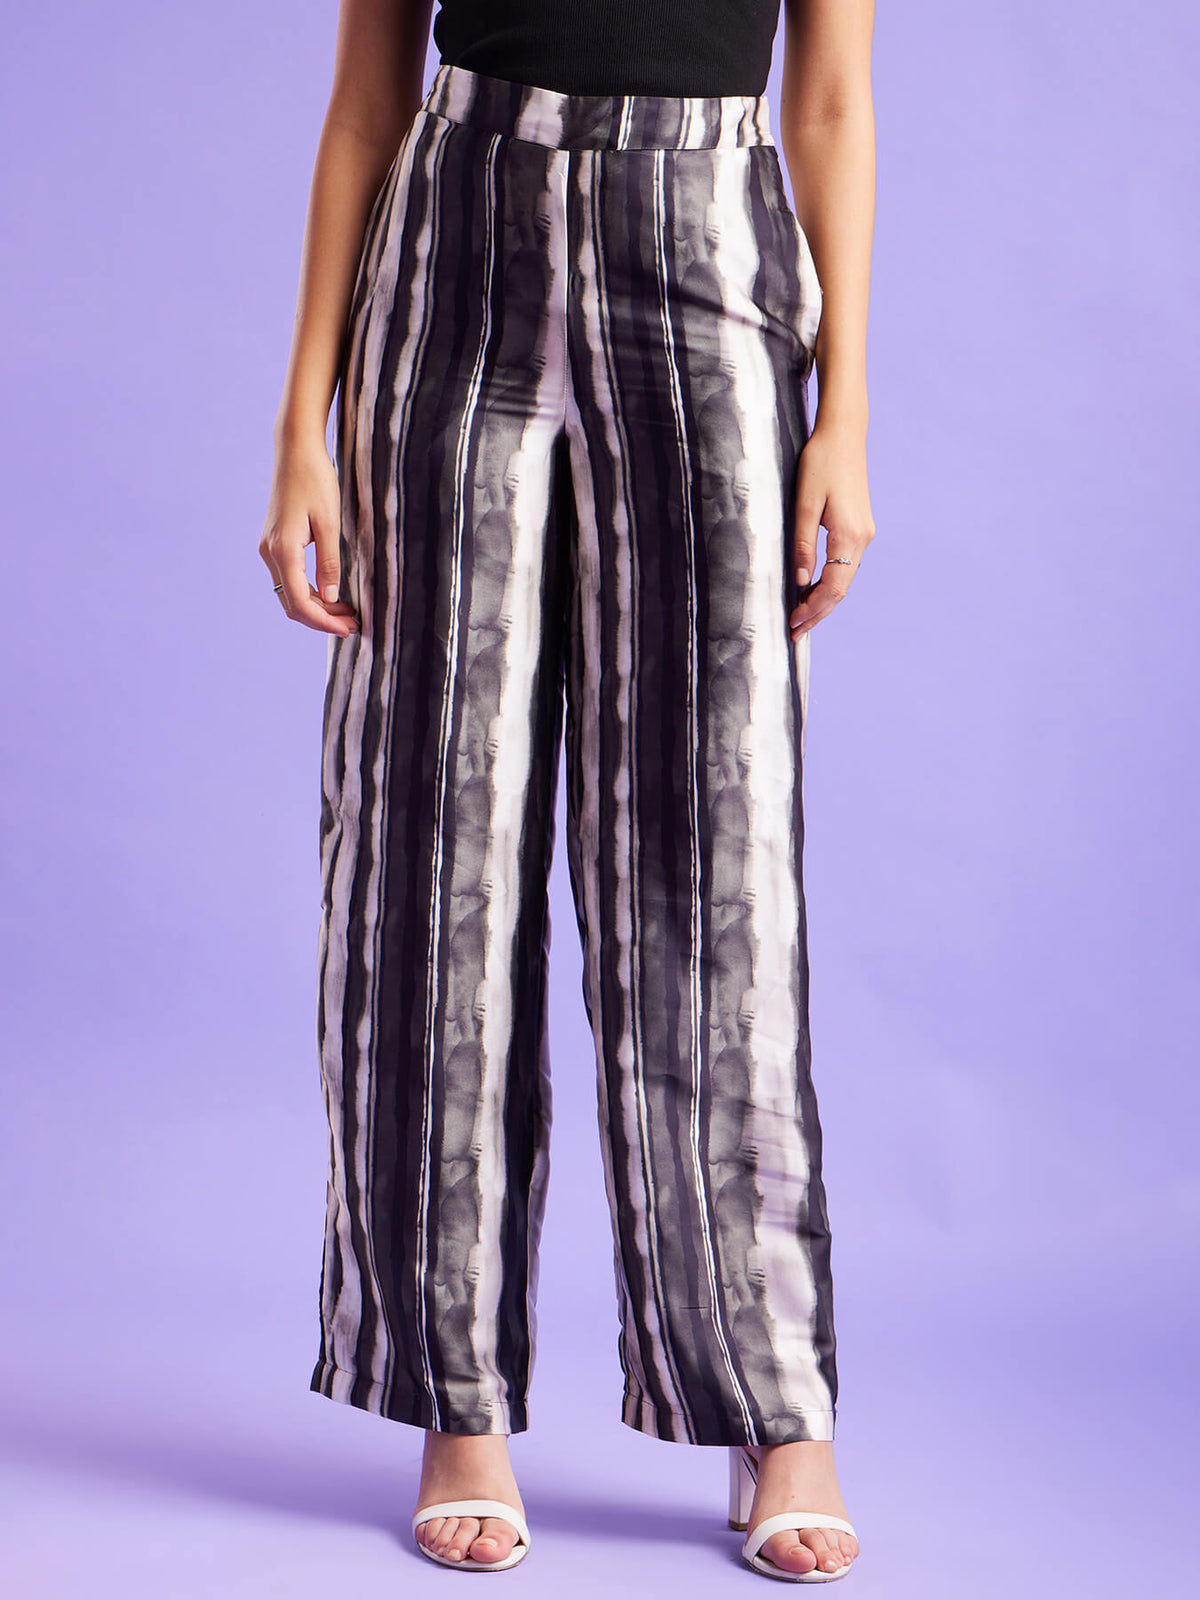 Marble Print Wide Leg Trousers - Black And White